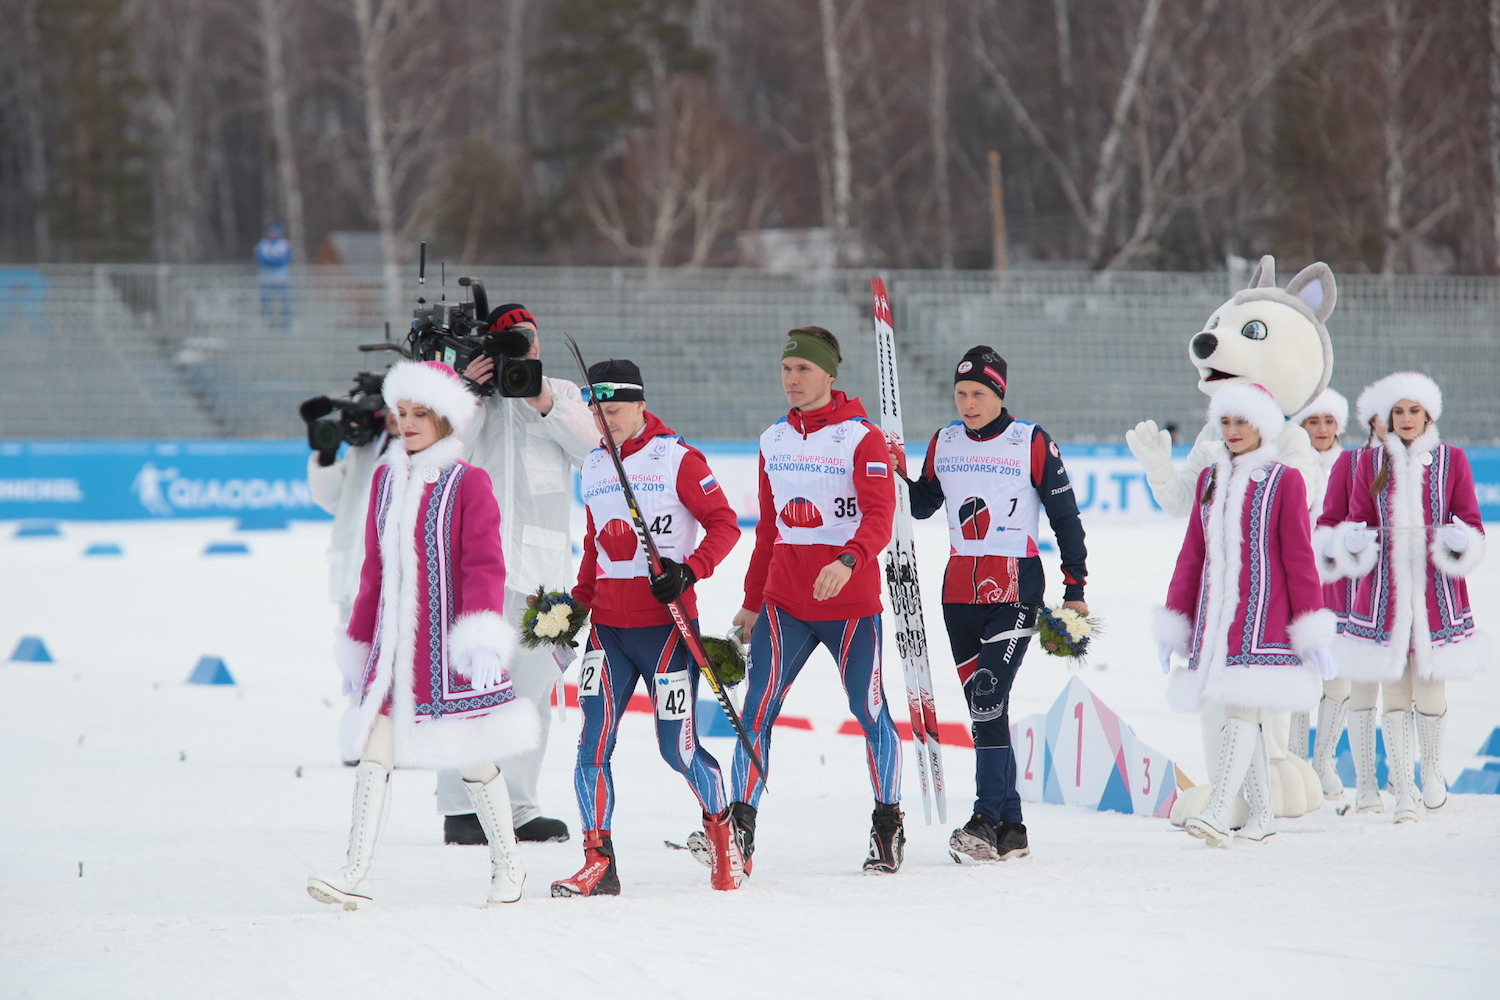 The first ski orienteering medals at a Winter Universiade were earned yesterday ©FISU